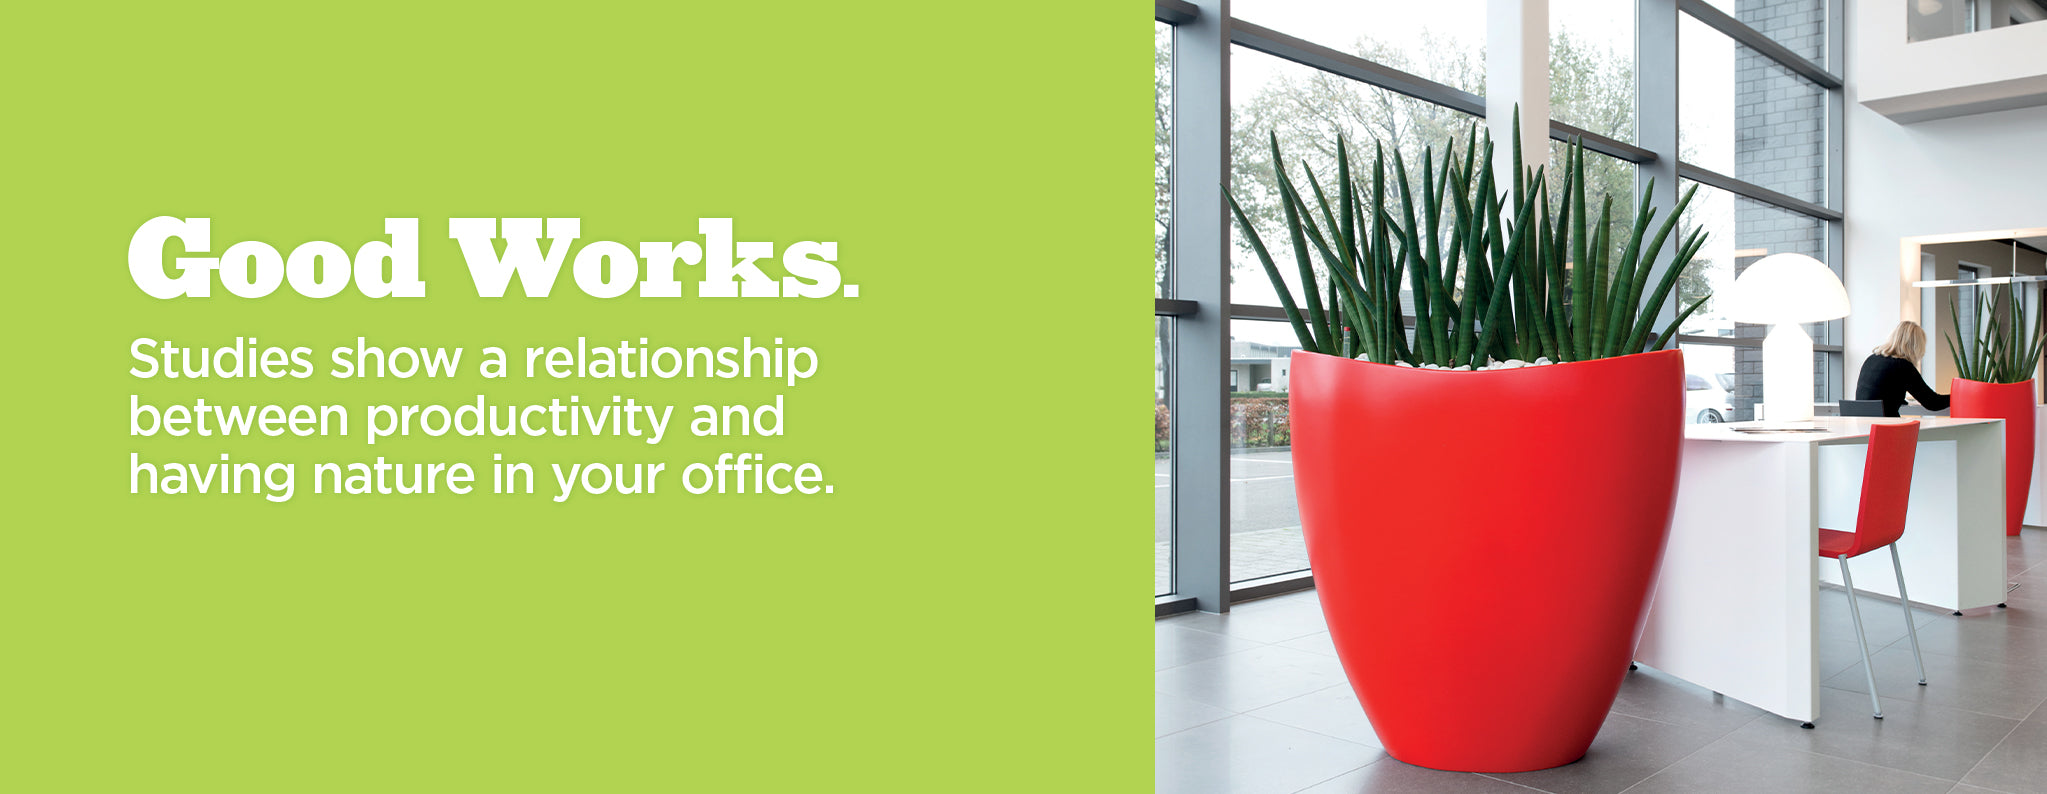 Good Works. Studies show a relationship between productivity and having nature in your office. Ovation Planter